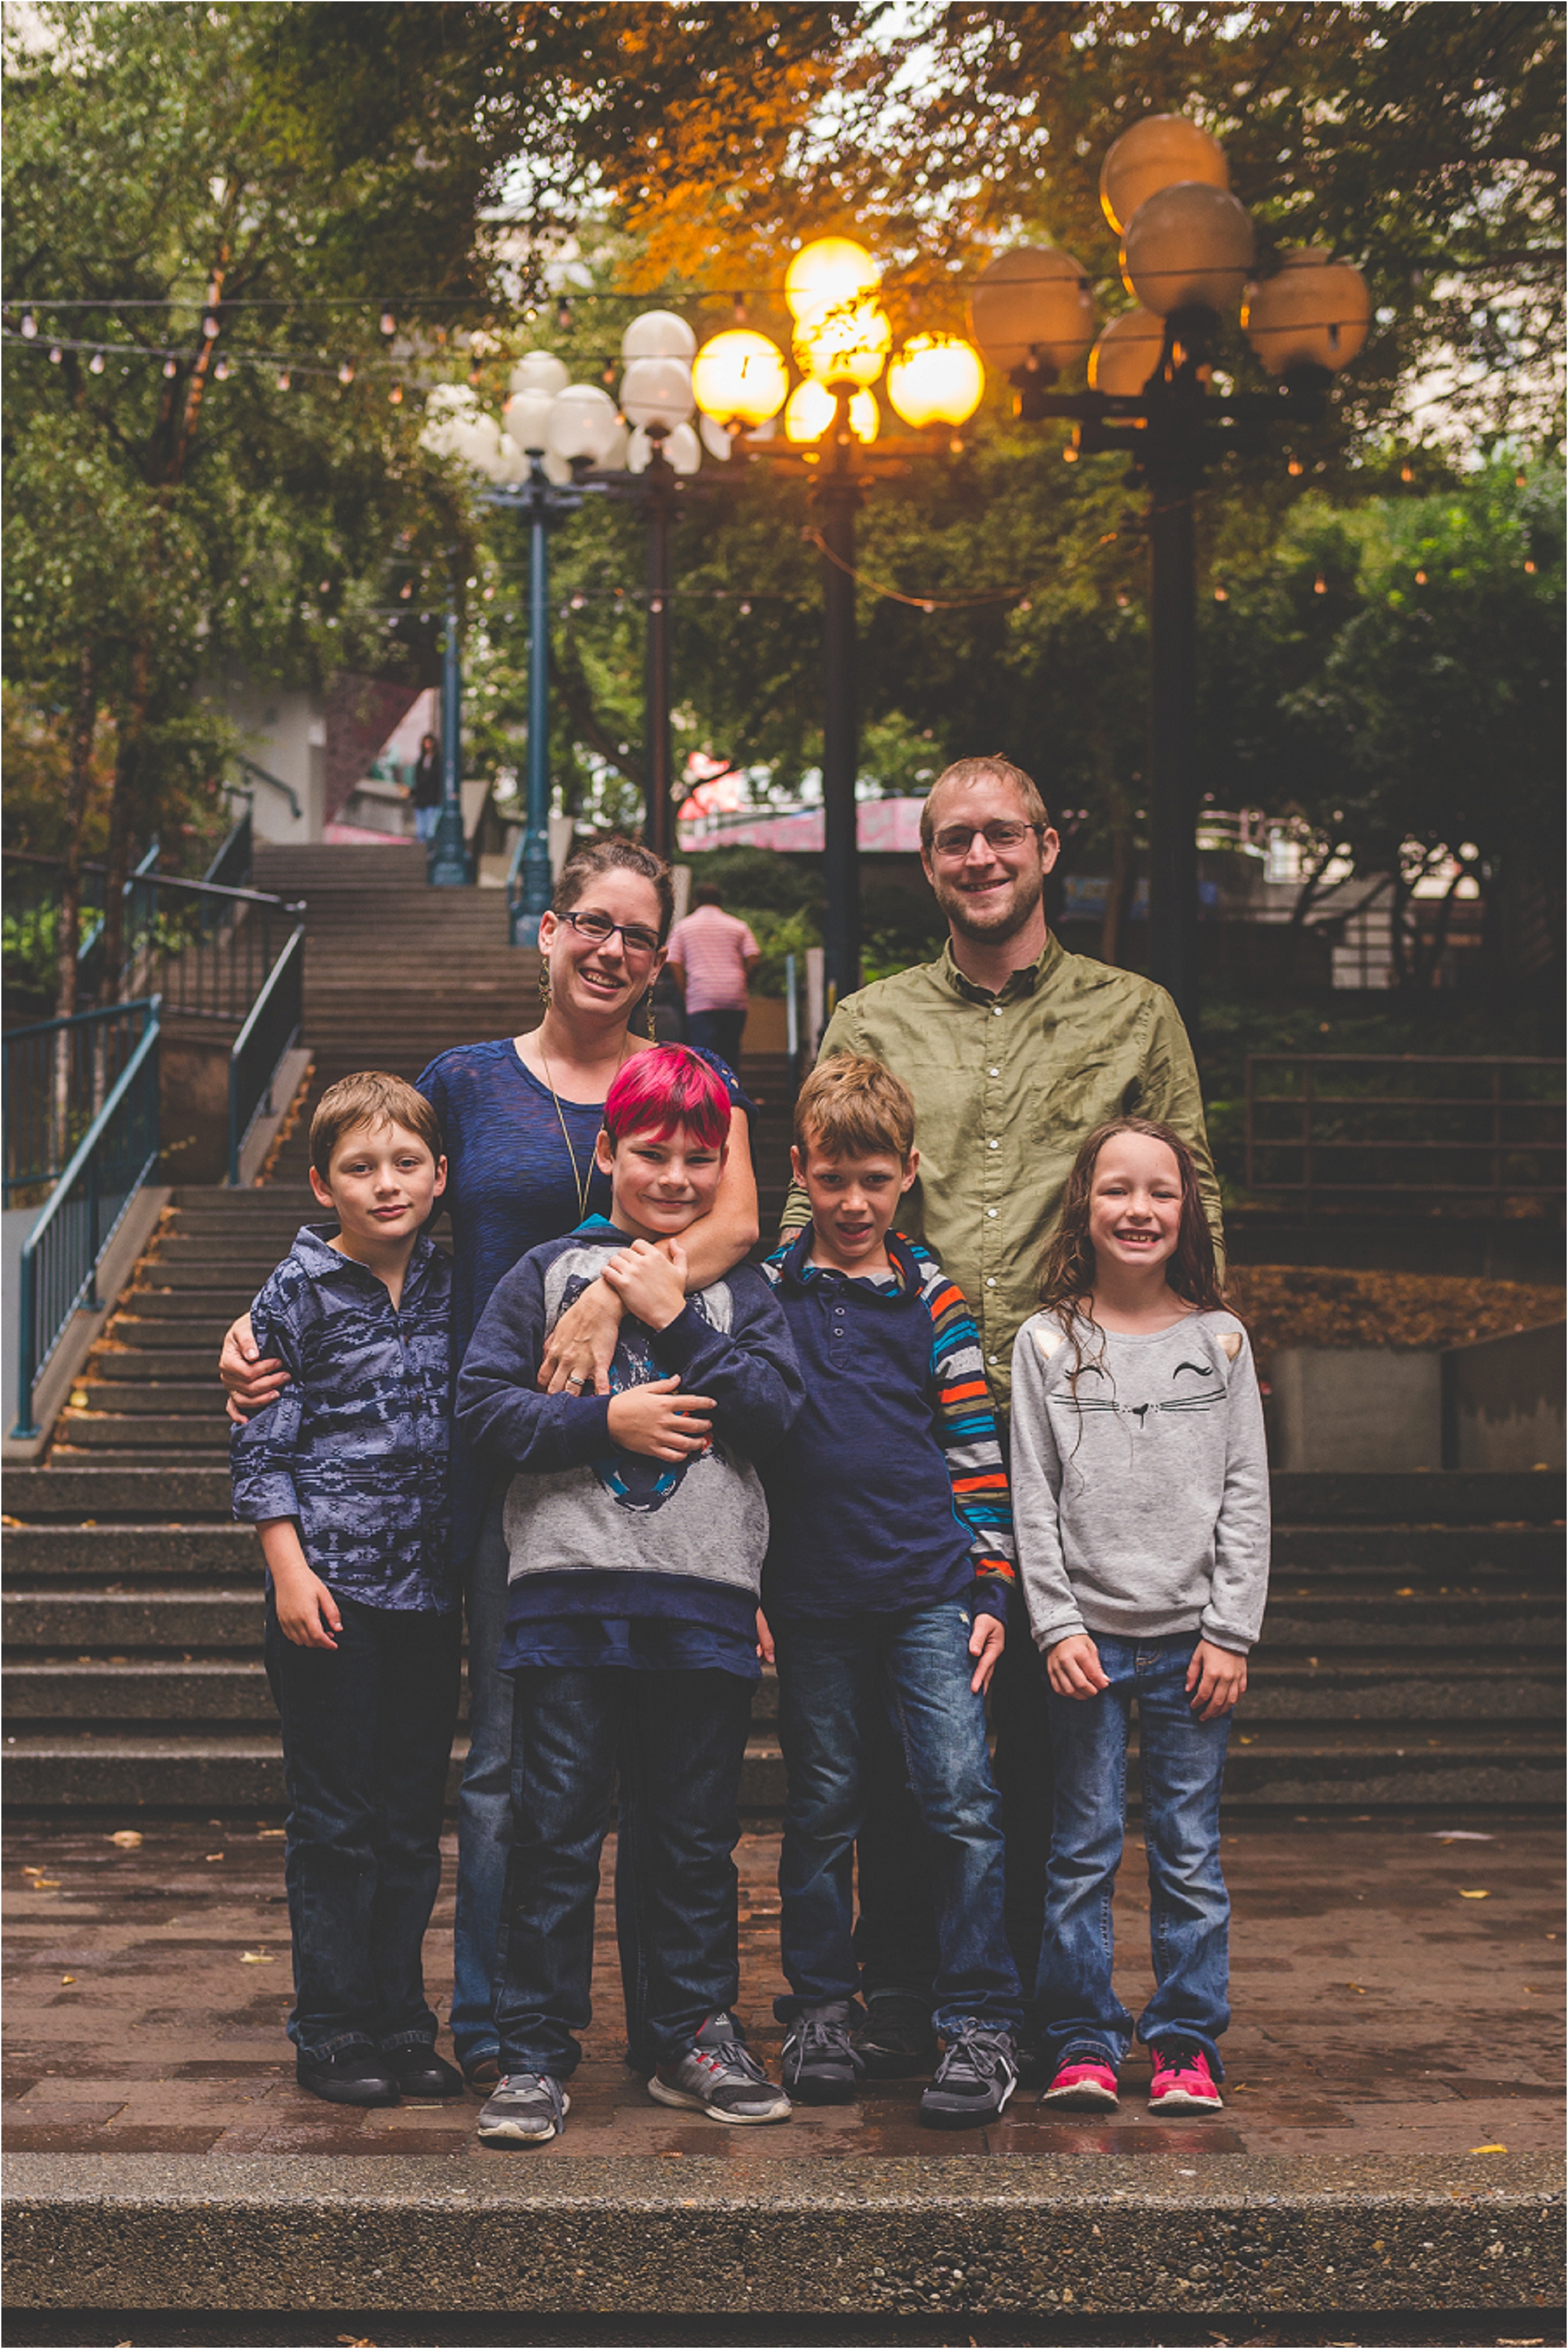 jannicka-mayte-downtown-seattle-family-session-pacific-northwest-lifestyle-photographer_0009.jpg